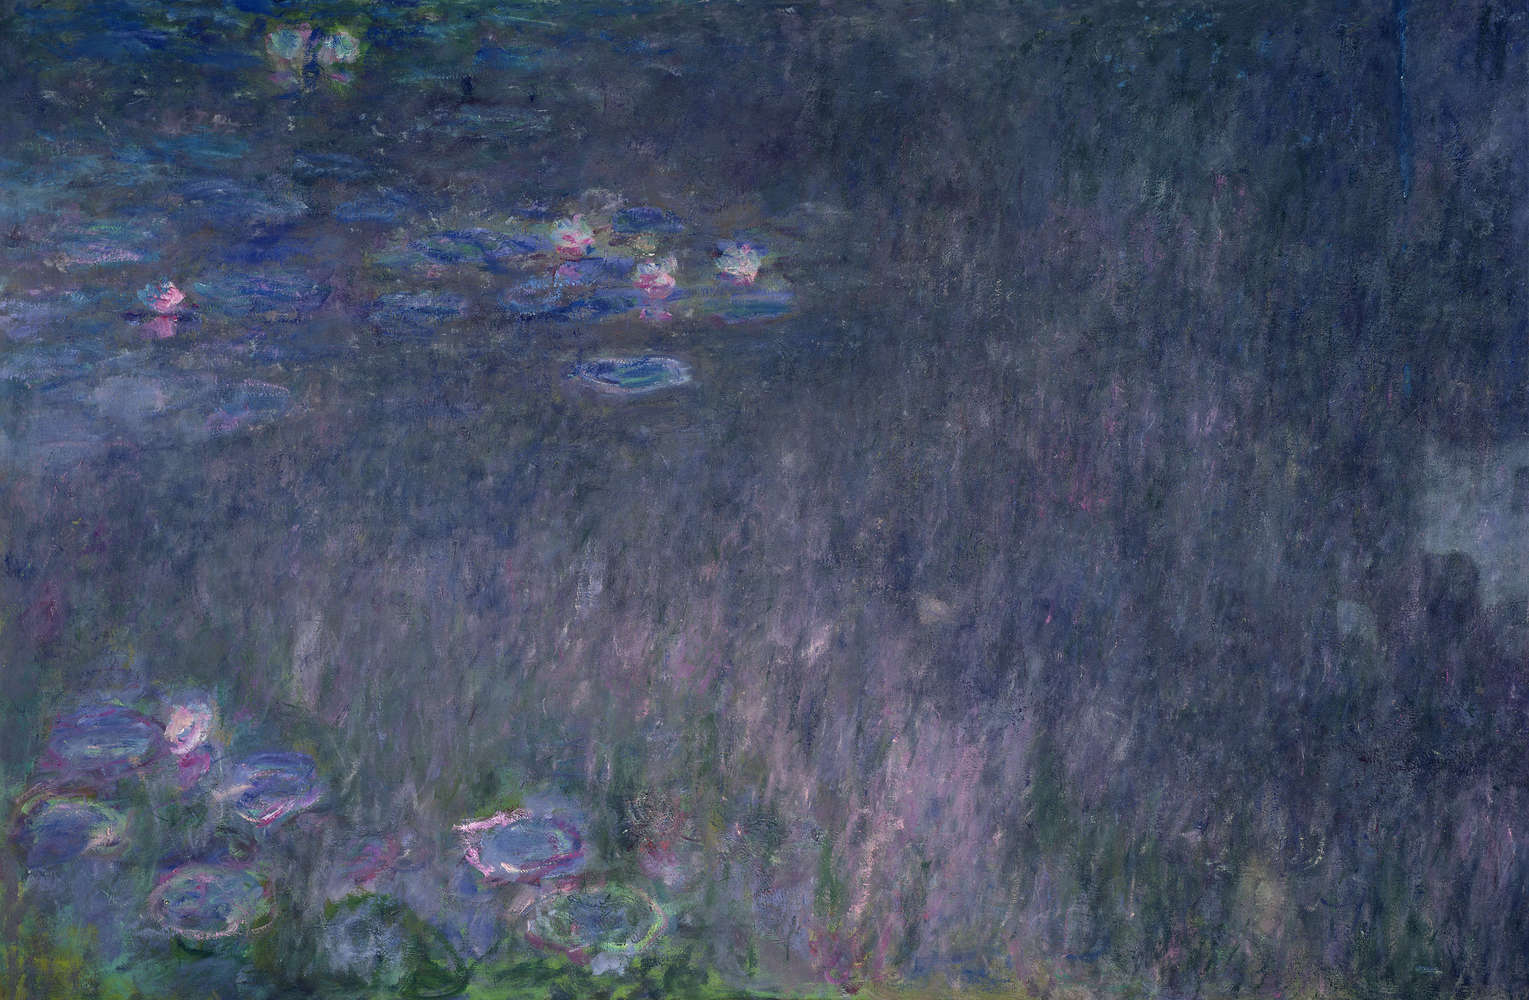             Photo wallpaper "Water lilies: reflection of the trees" by Claude Monet
        